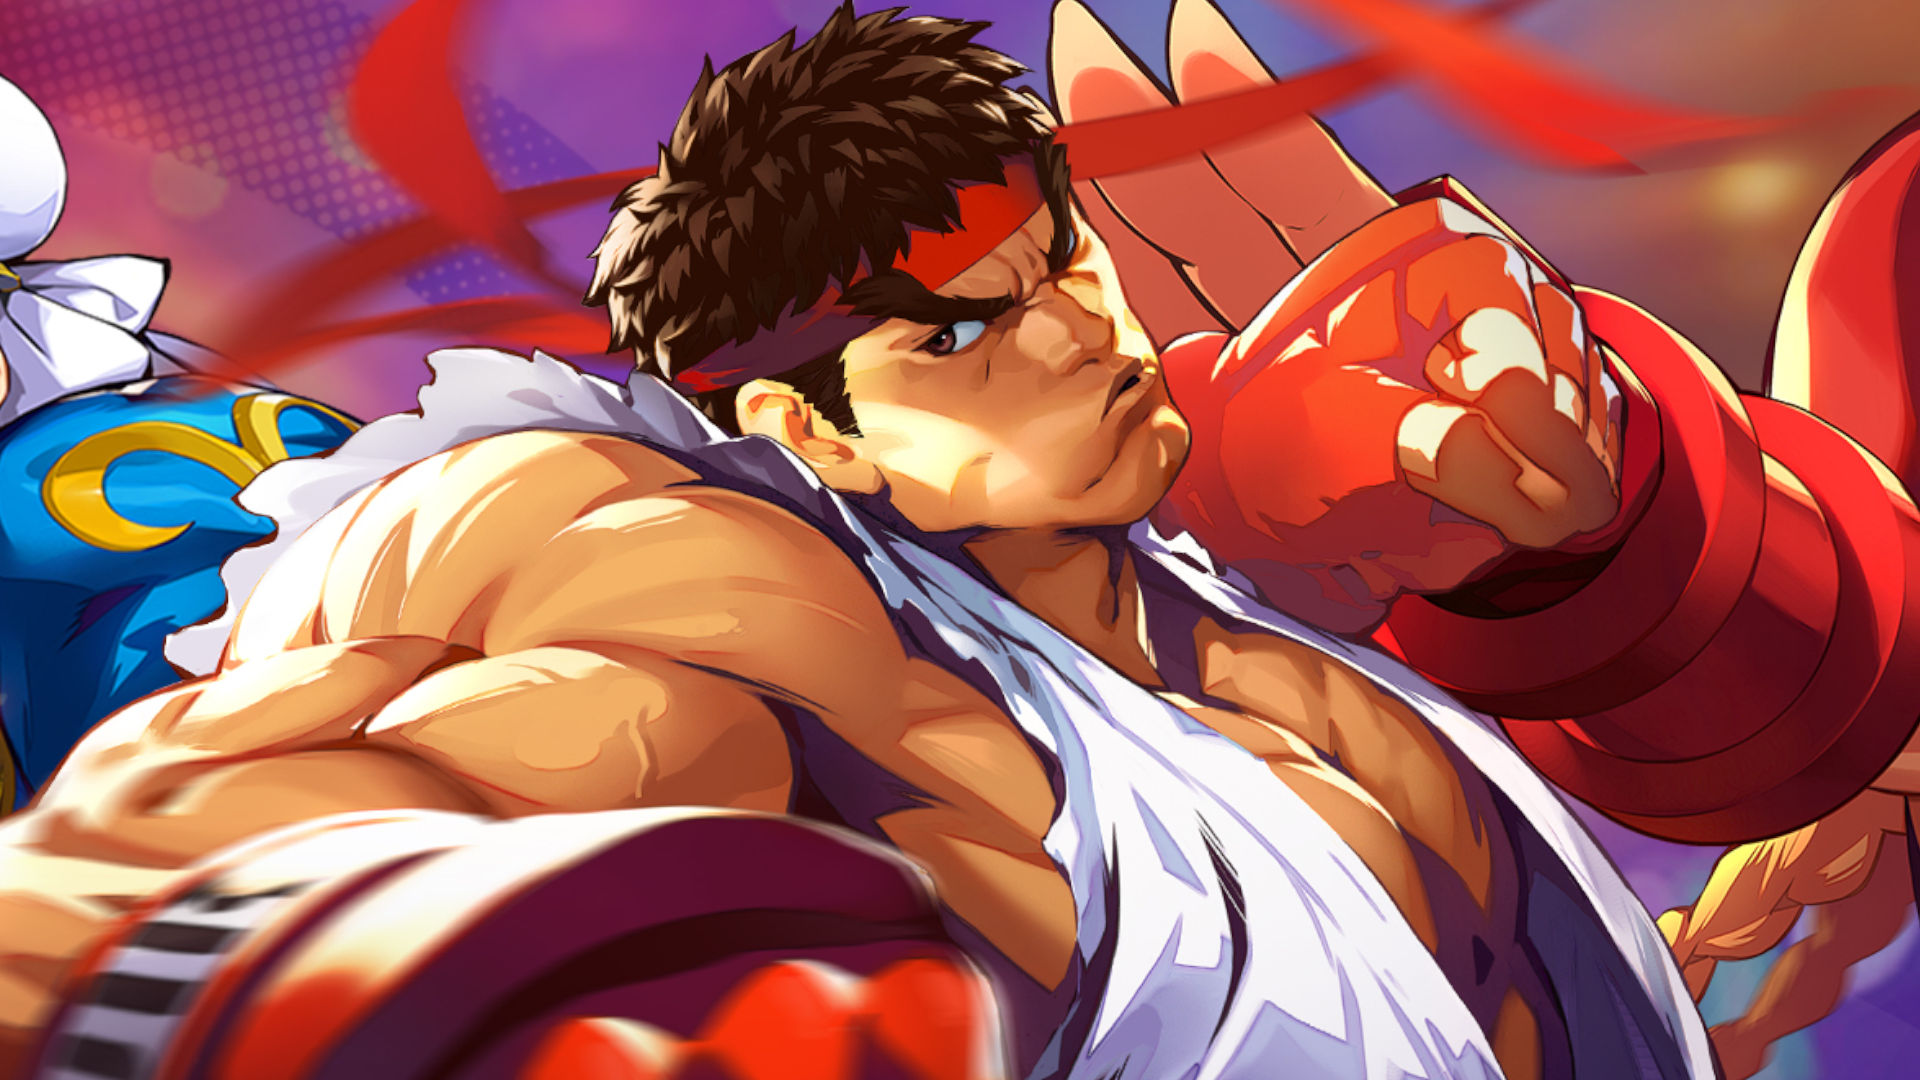 Crunchyroll Games Launches Street Fighter: Duel Mobile Game in February 2023